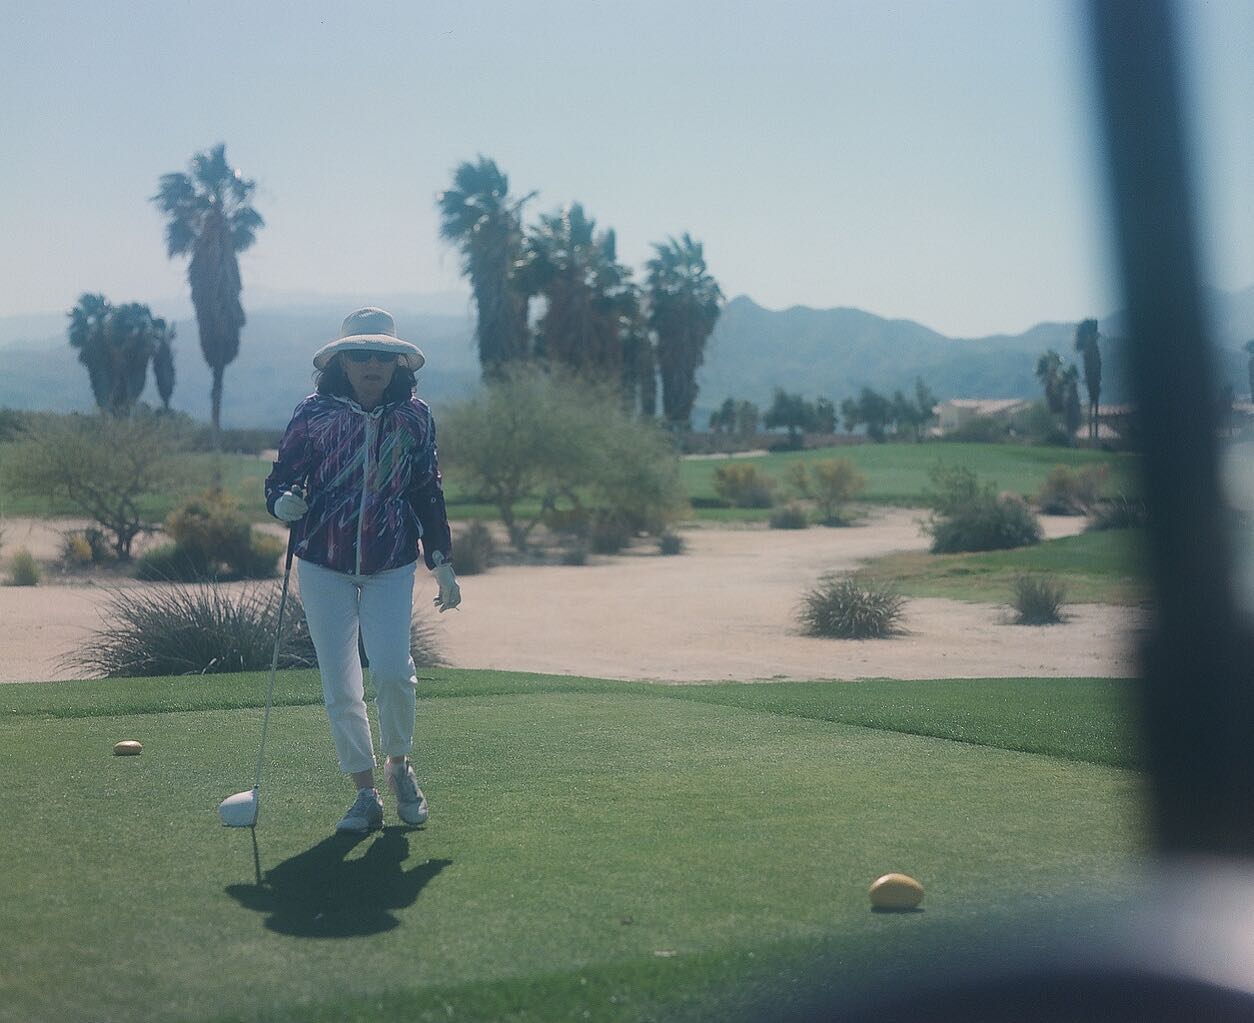 Happy Mother’s Day to the greatest • @kodak Vericolor III 160 manufacturered the year I was born • Mamiya RB67
.
.
.
#film #photography #filmisnotdead #filmphotography #golf #mom